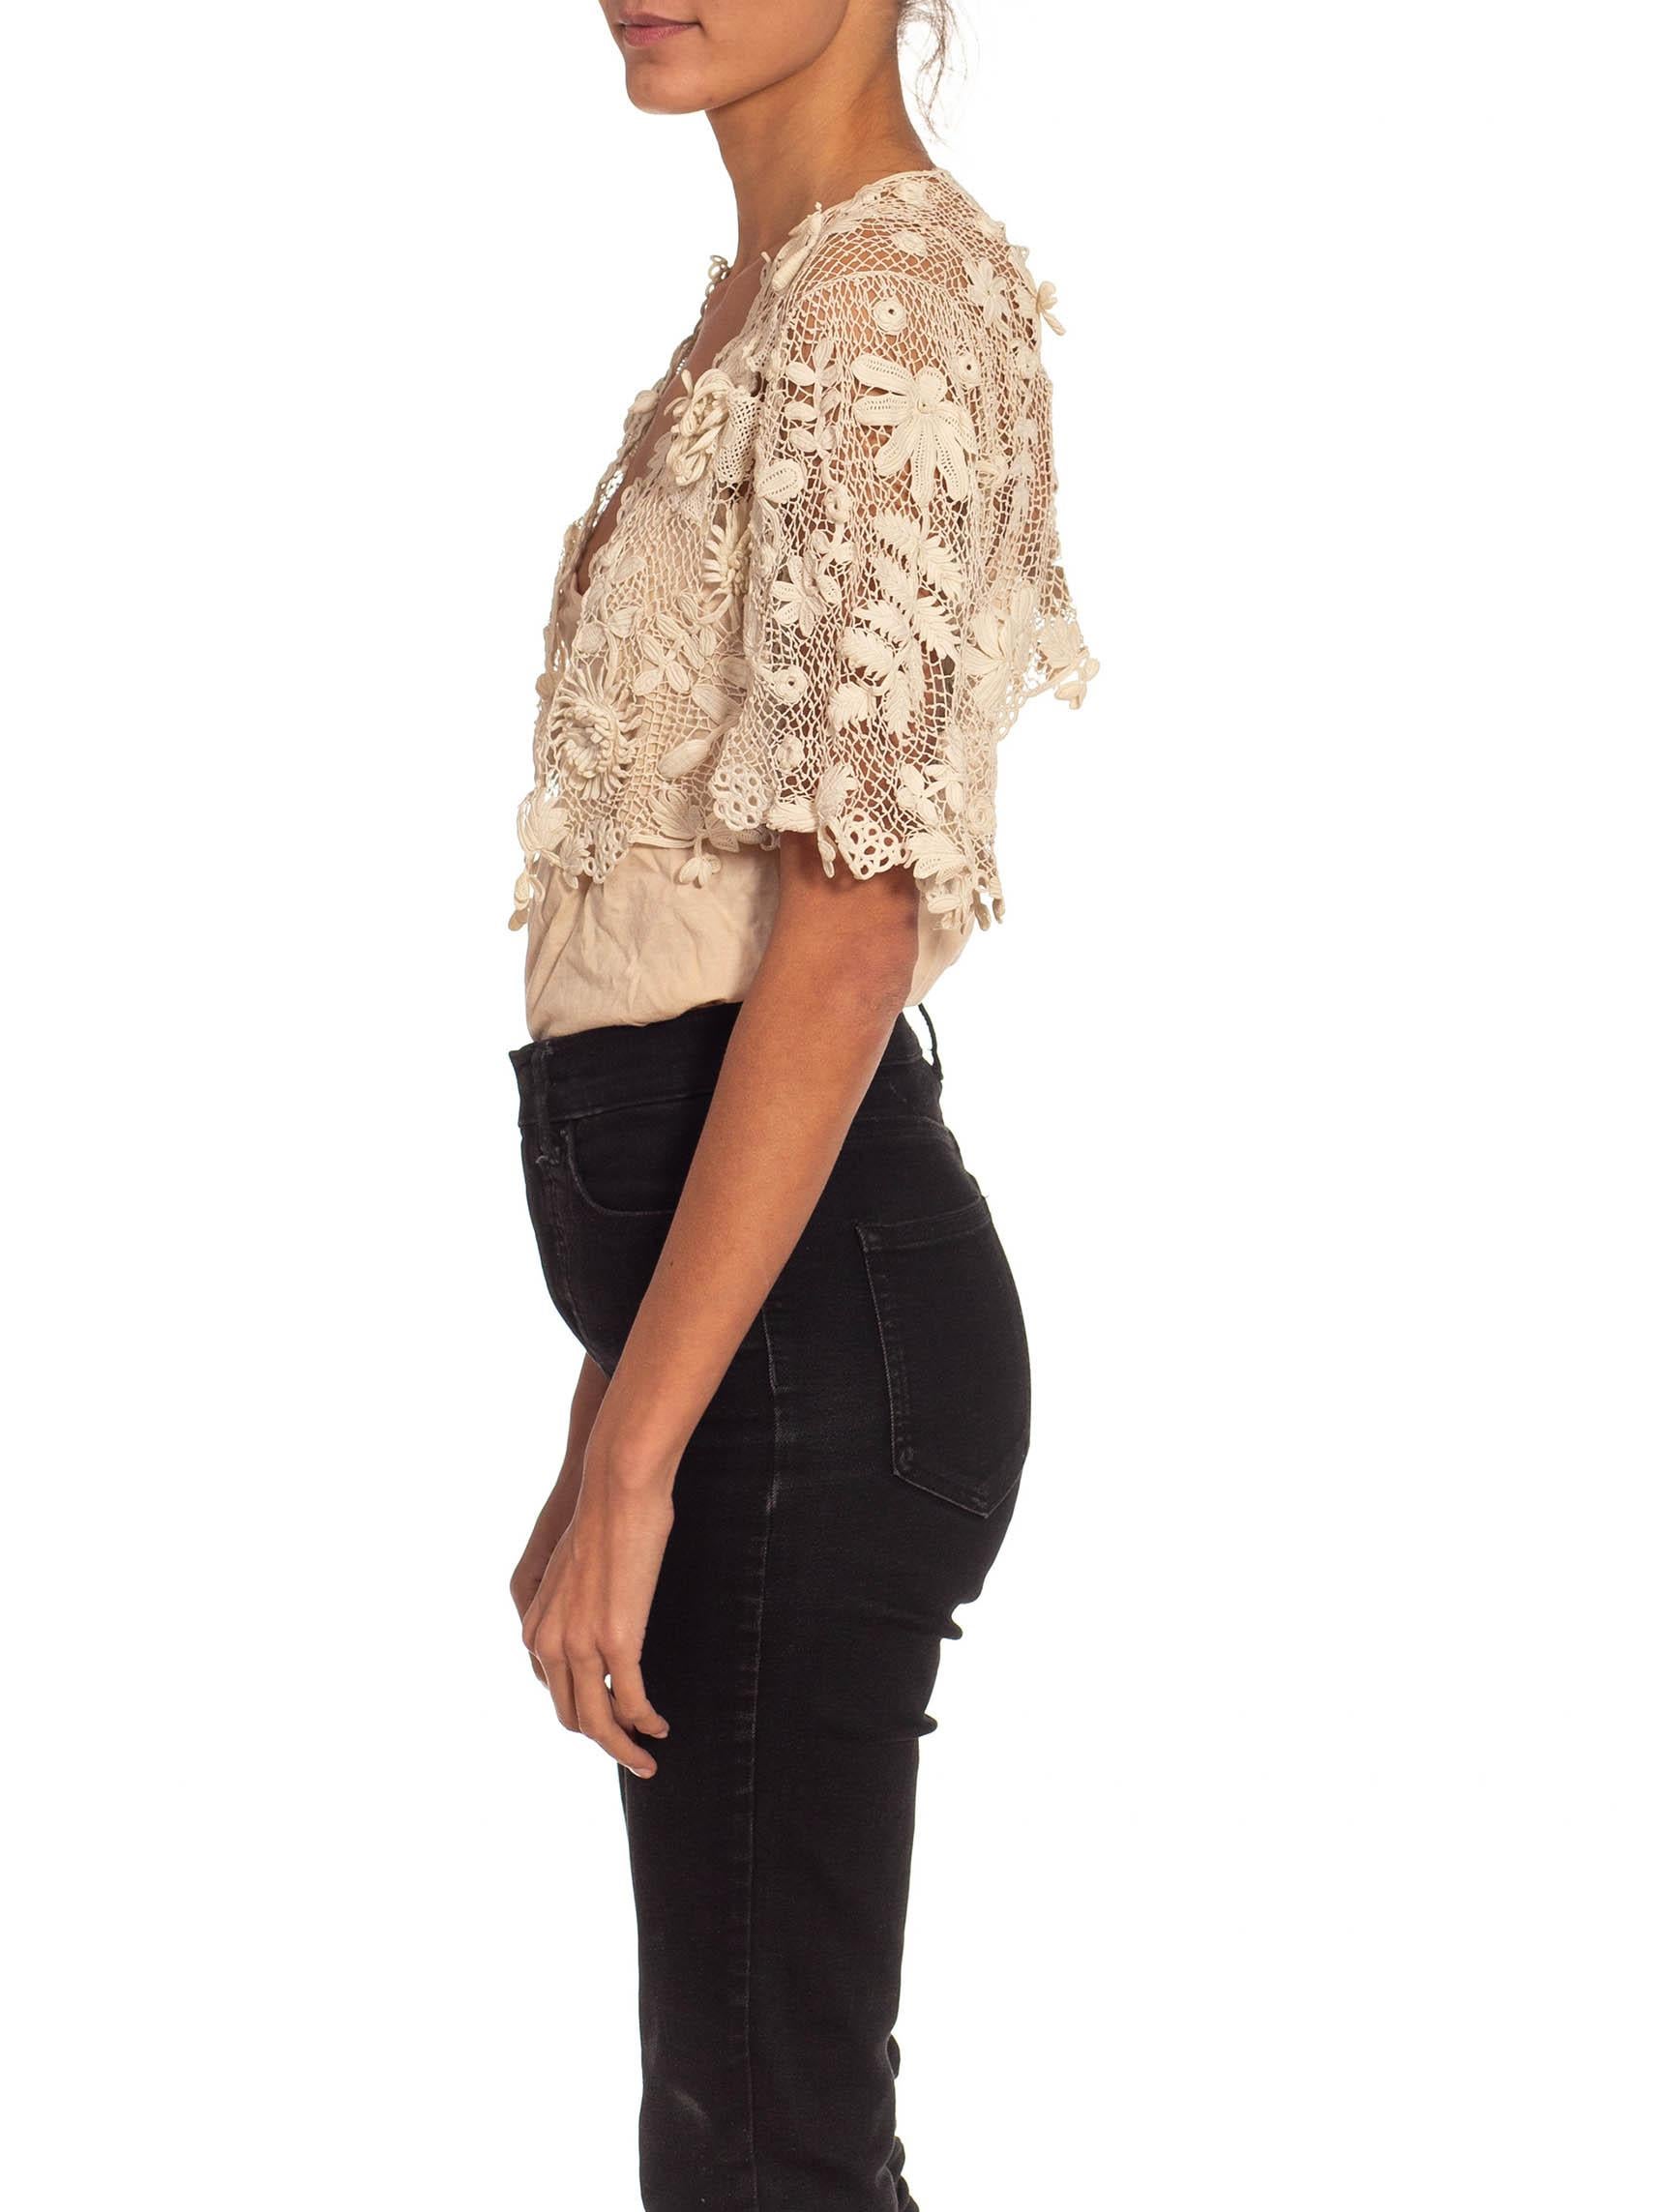 Women's Edwardian White Lace Irish Crochet Jacket With Dragonfly Accents For Sale